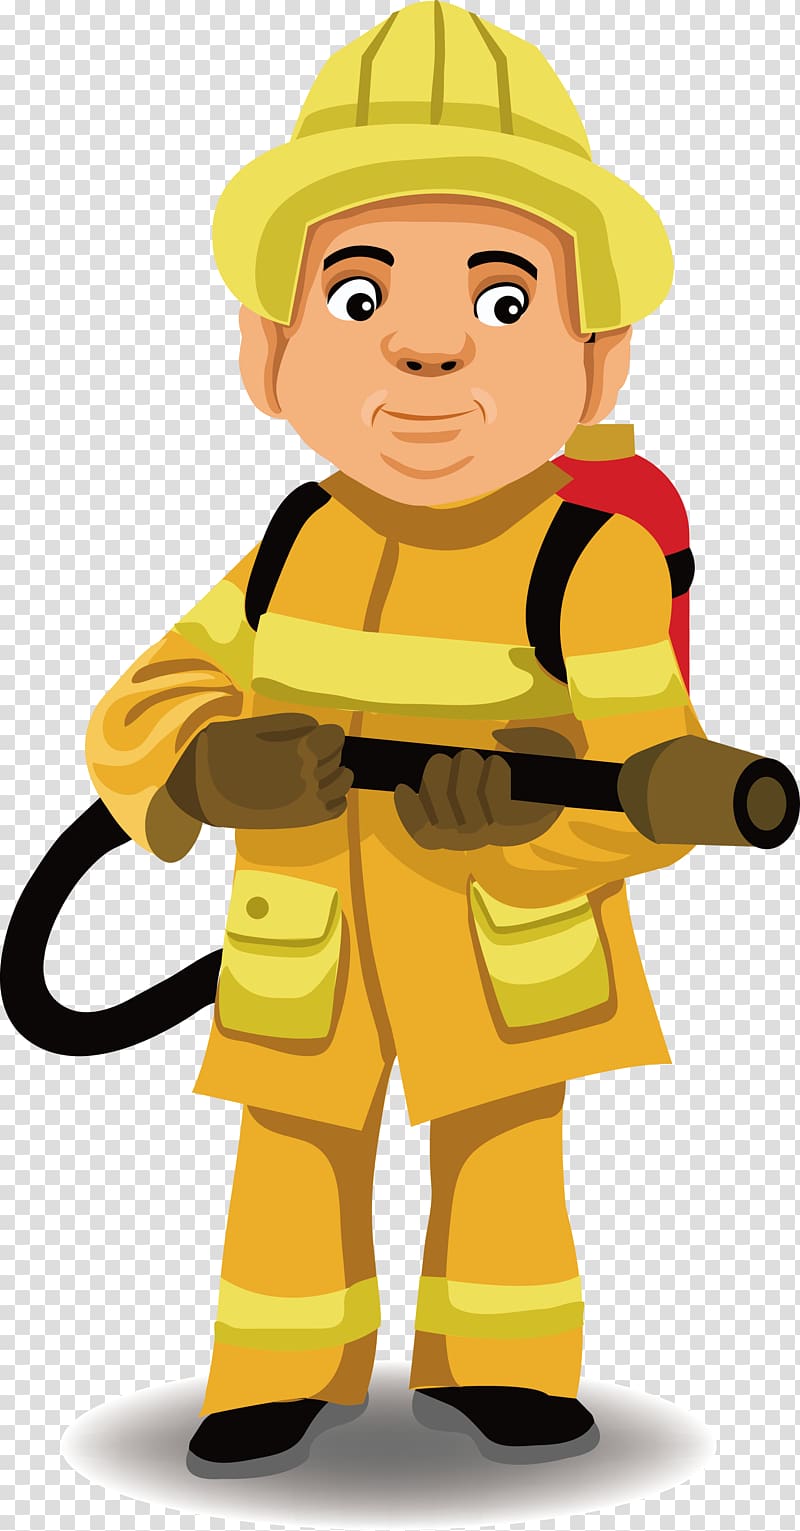 Police officer Firefighter Firefighting Illustration, fire brigade transparent background PNG clipart